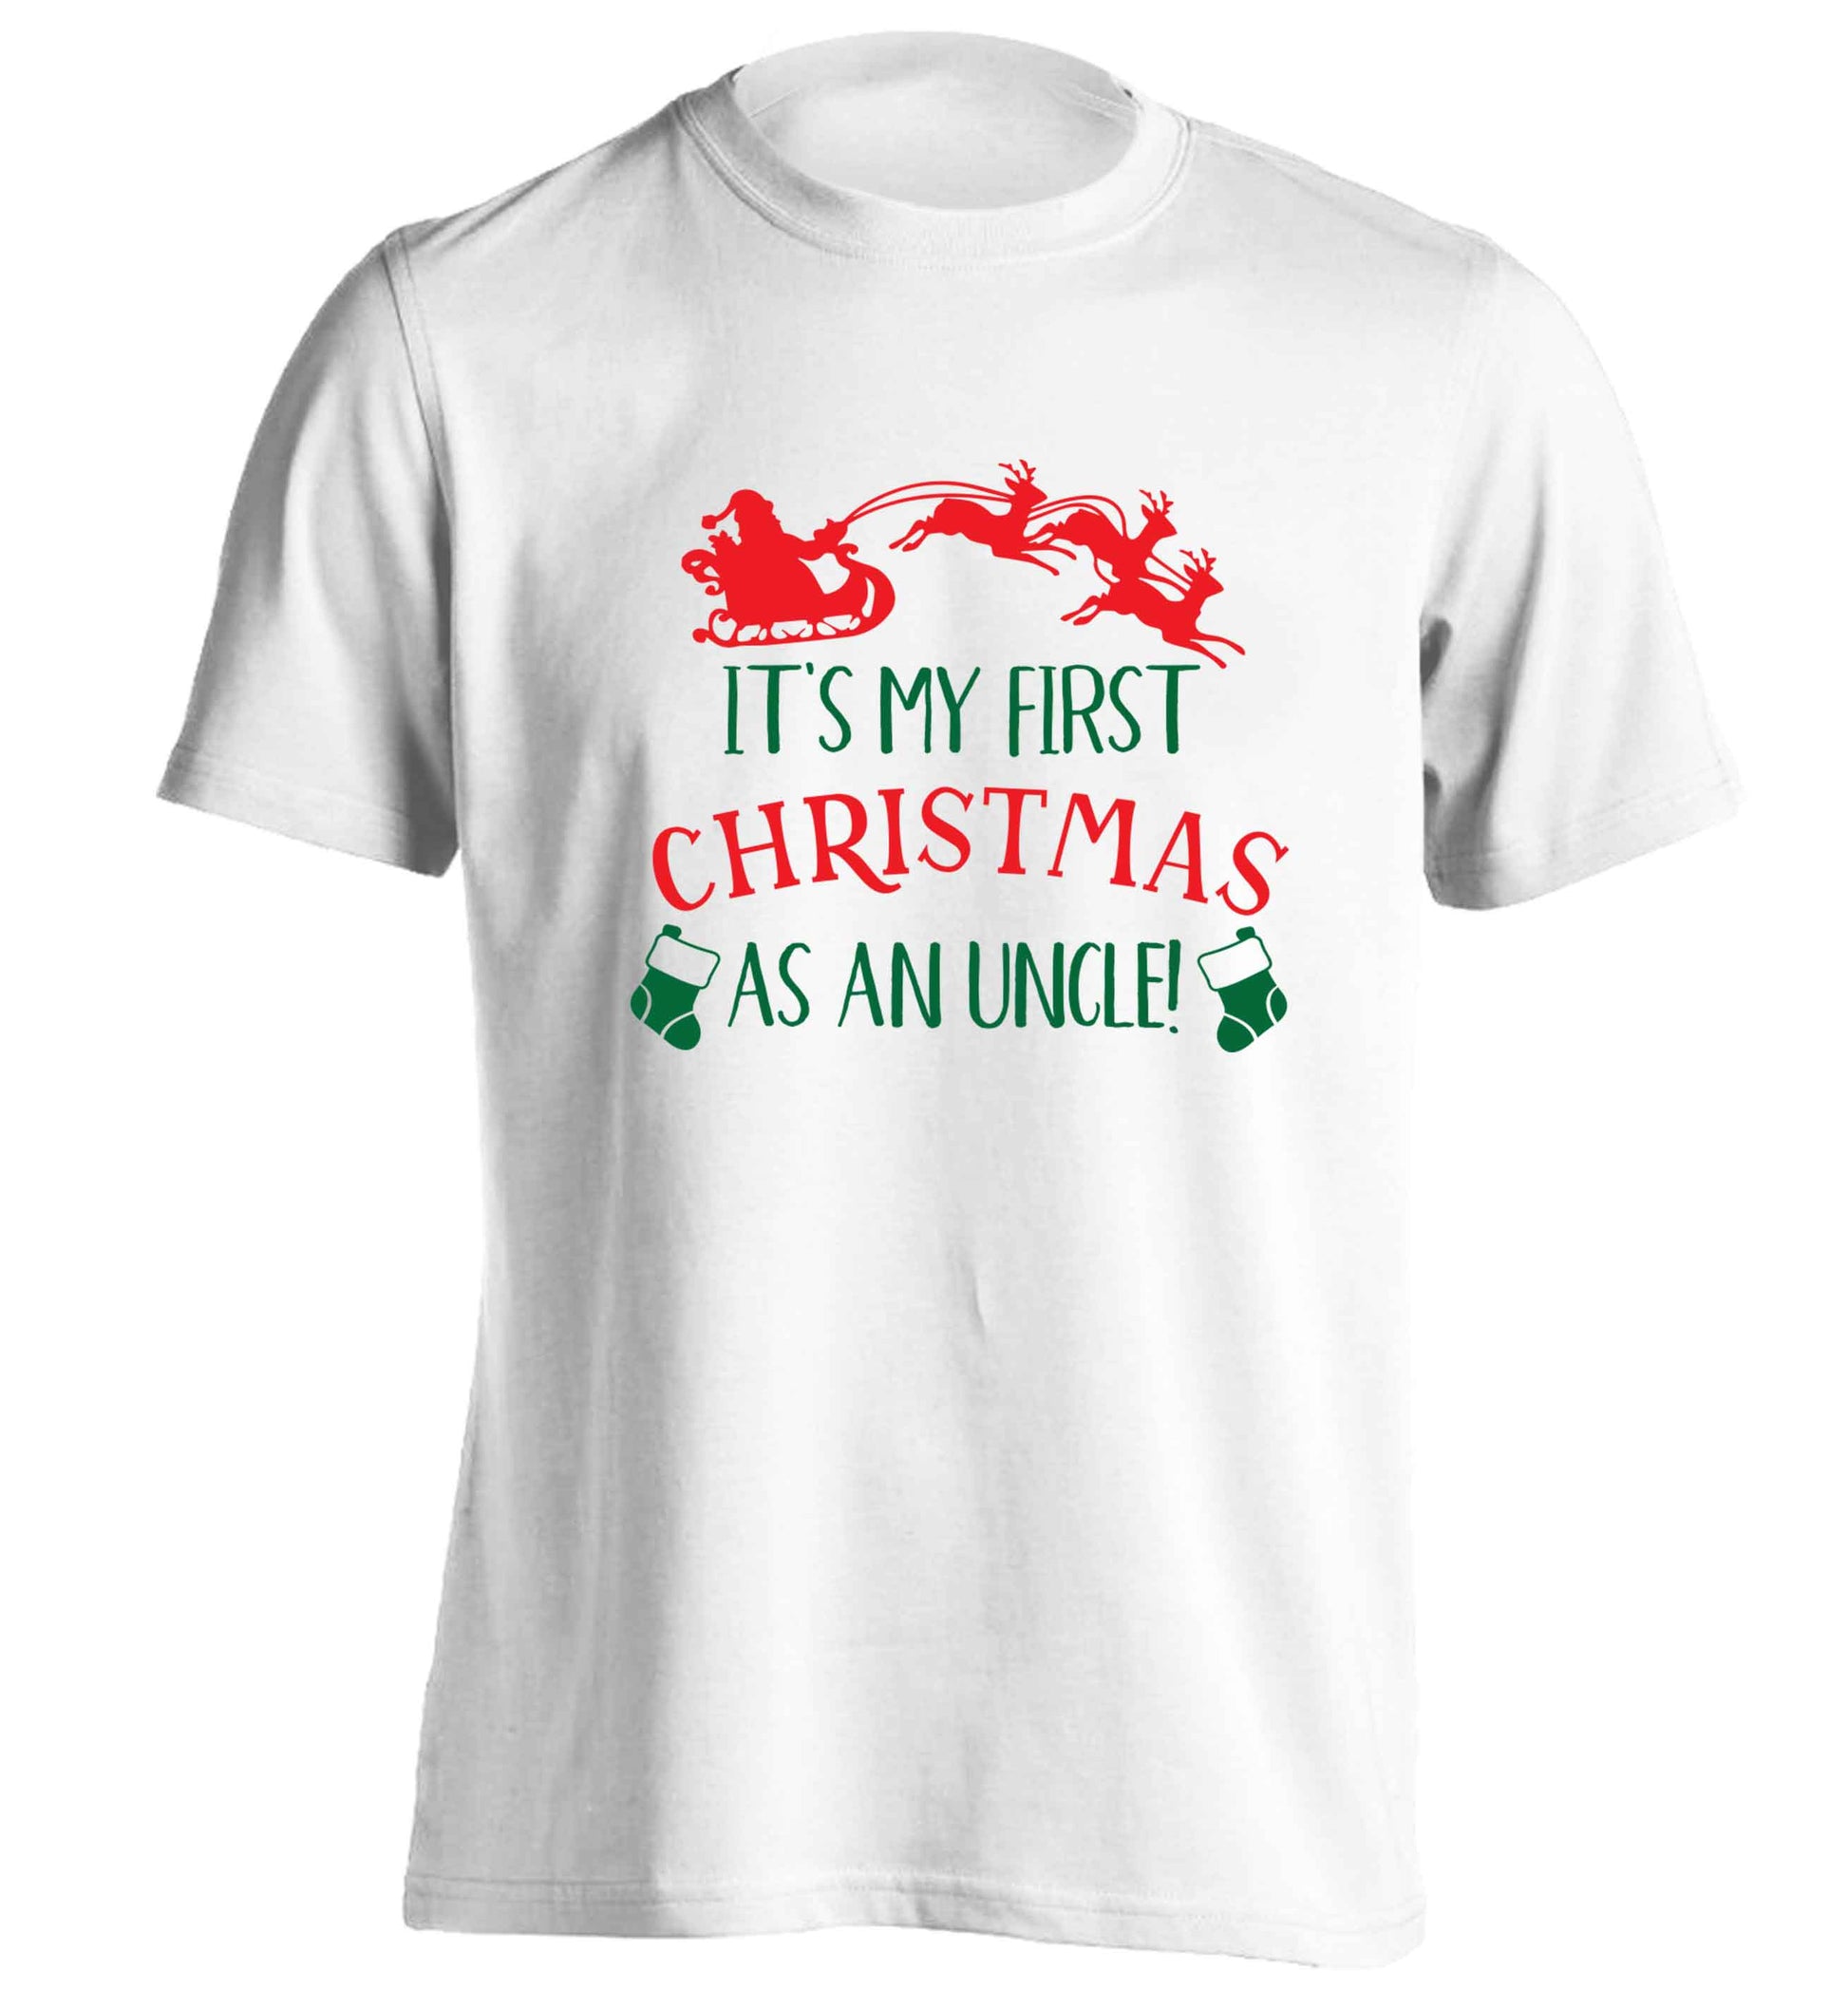 It's my first Christmas as an uncle! adults unisex white Tshirt 2XL